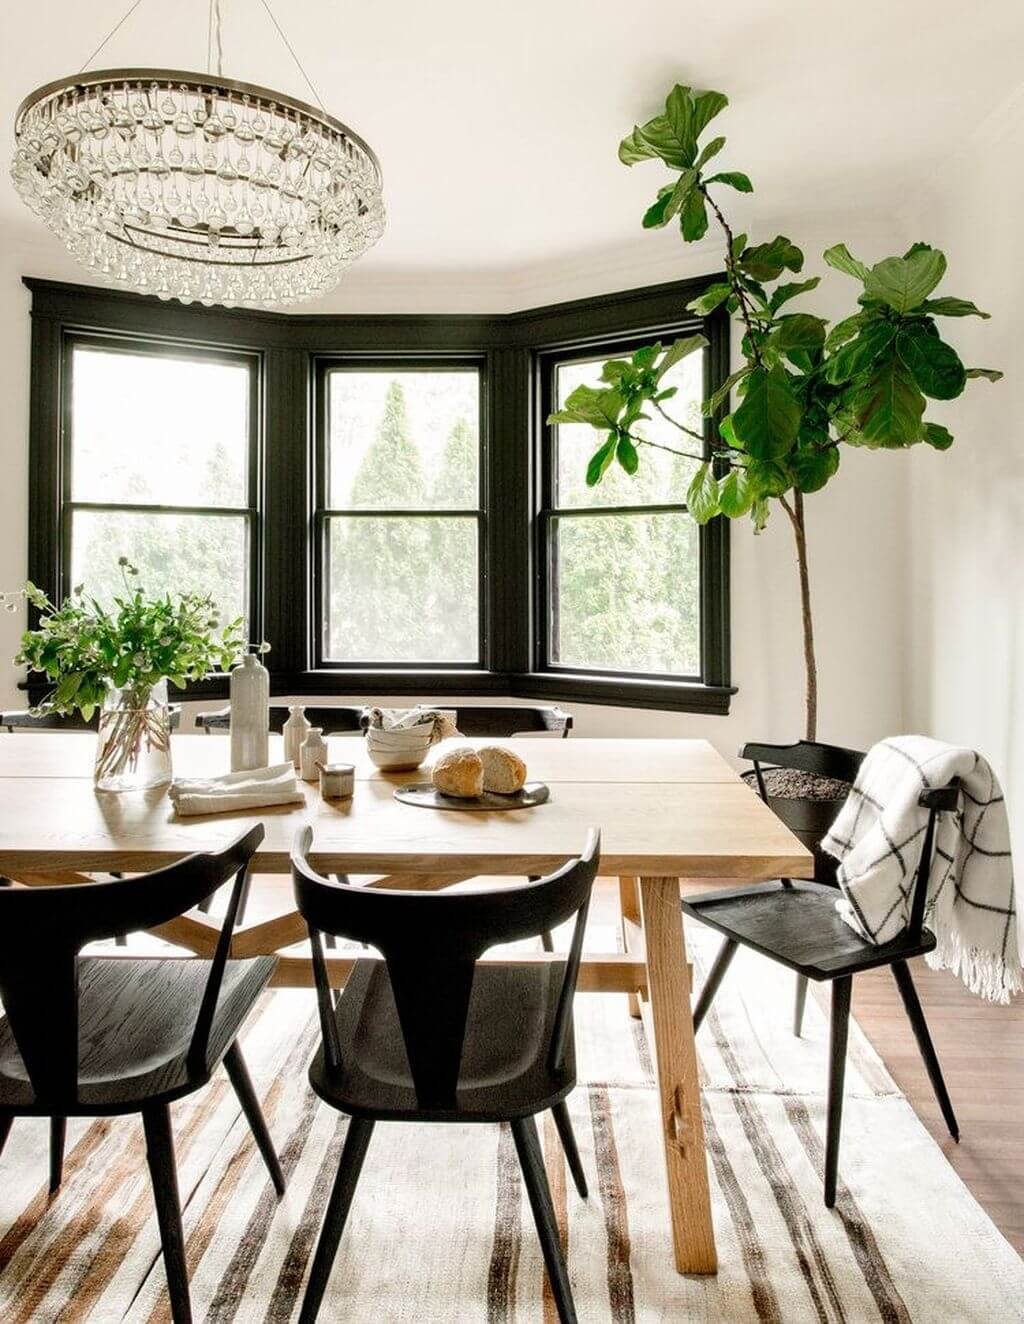 A dining room table with chairs and a potted plant
